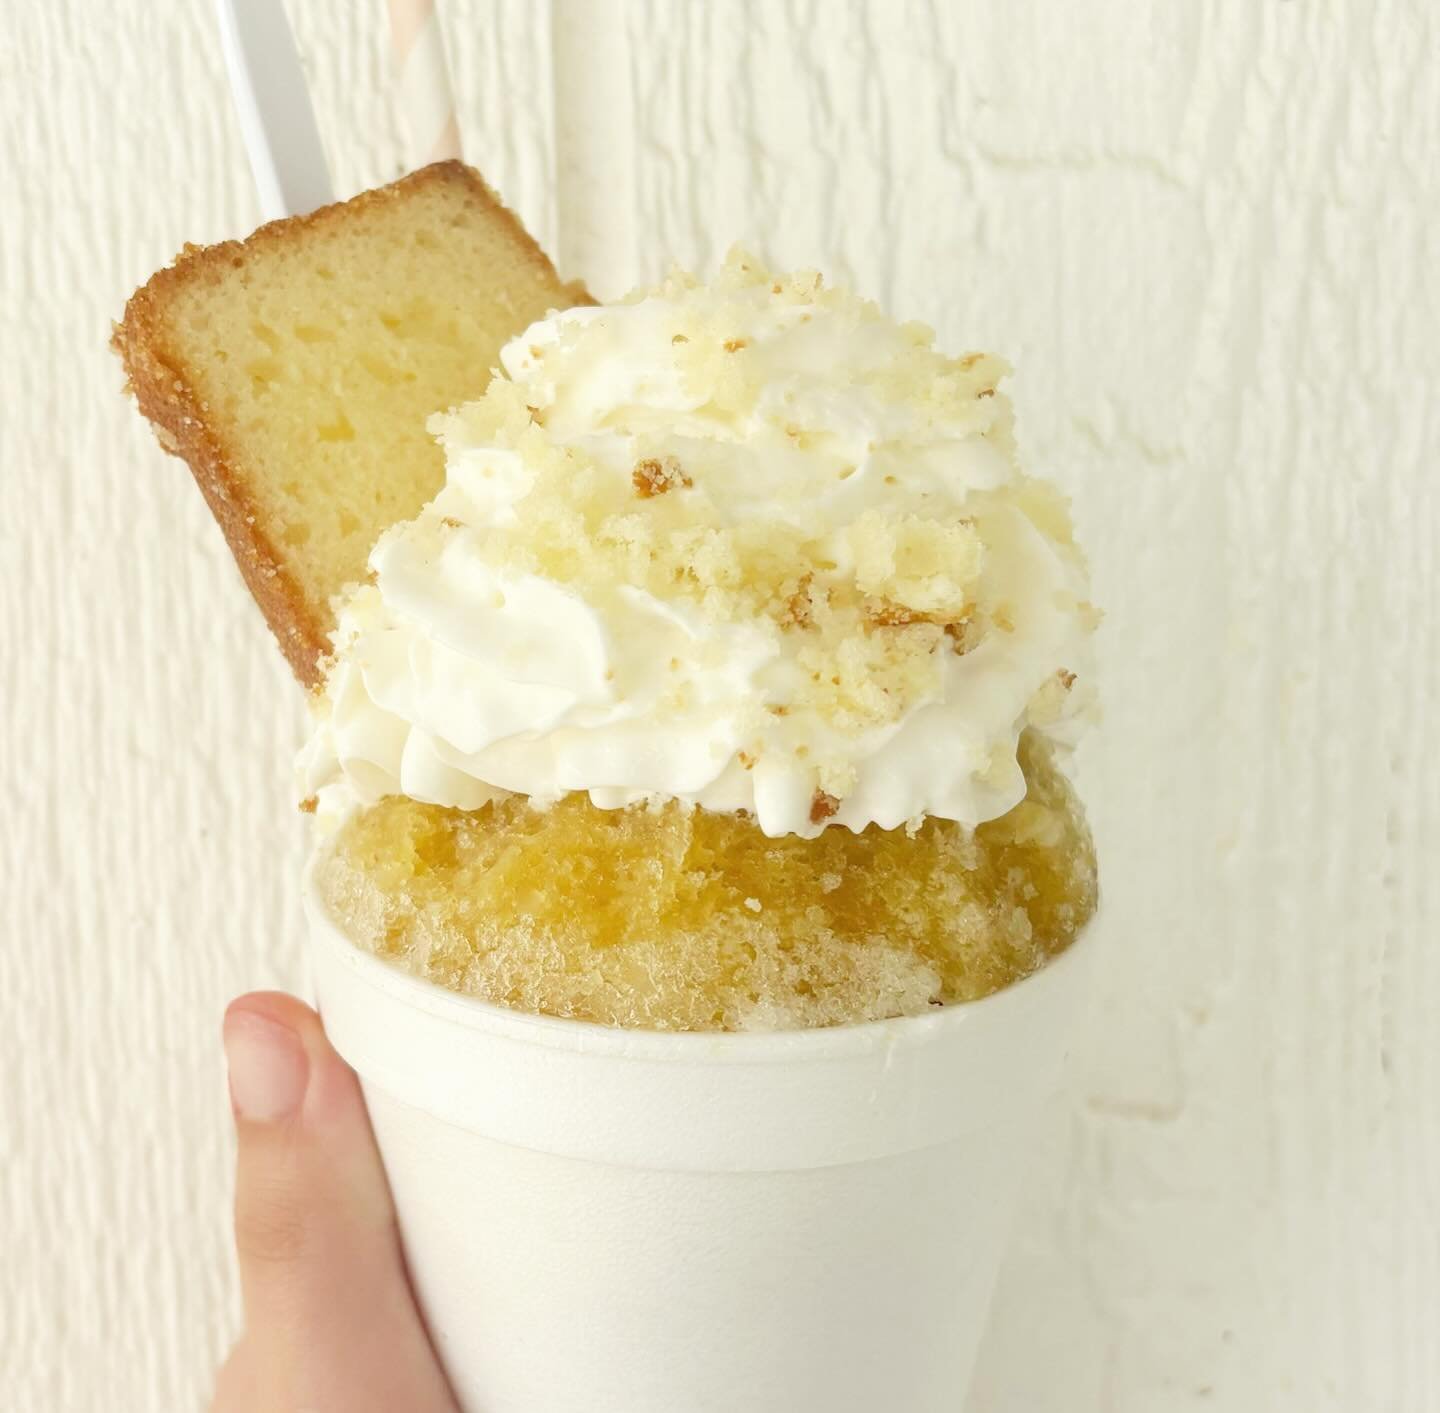 Now until the 17th!

CREAM CAKE -$2.00 extra

🍞 butter beer flavor
🍞 stuffed: @bluebellicecream gooey butter cake ice cream
🍞 whipped cream
🍞 butter cake crumbs and cake slice on top!

⏰OPEN 12-8 everyday 
📍Manvel, TX 
🚘Drive-Thru 

#buttercake